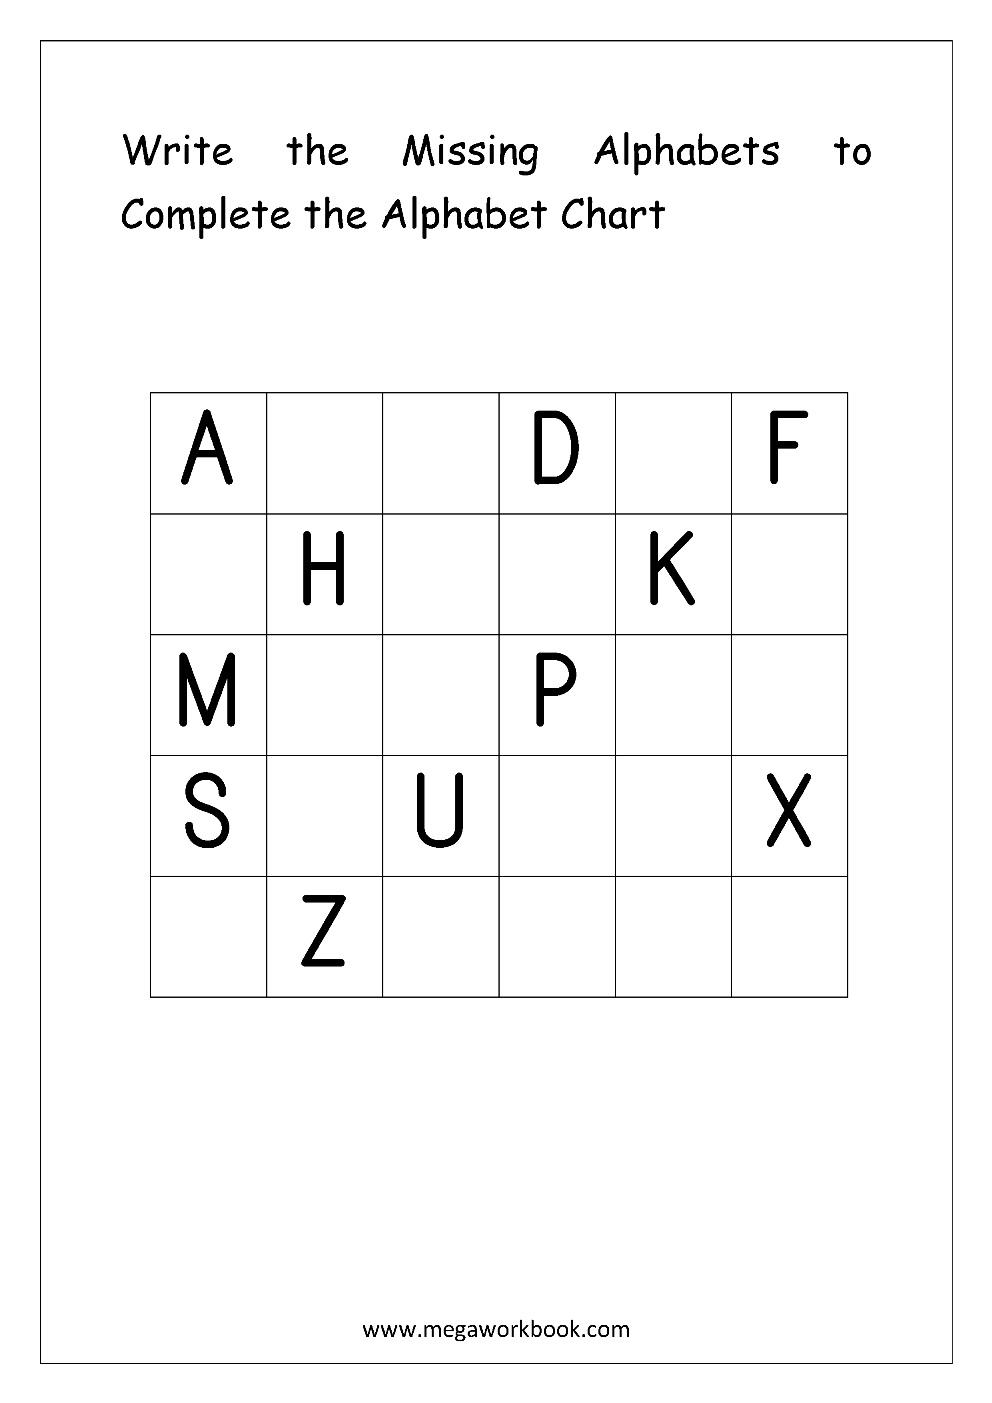 Free English Worksheets - Alphabetical Sequence - Alphabetical Order | Fill In The Missing Letters In Words Printable Worksheets